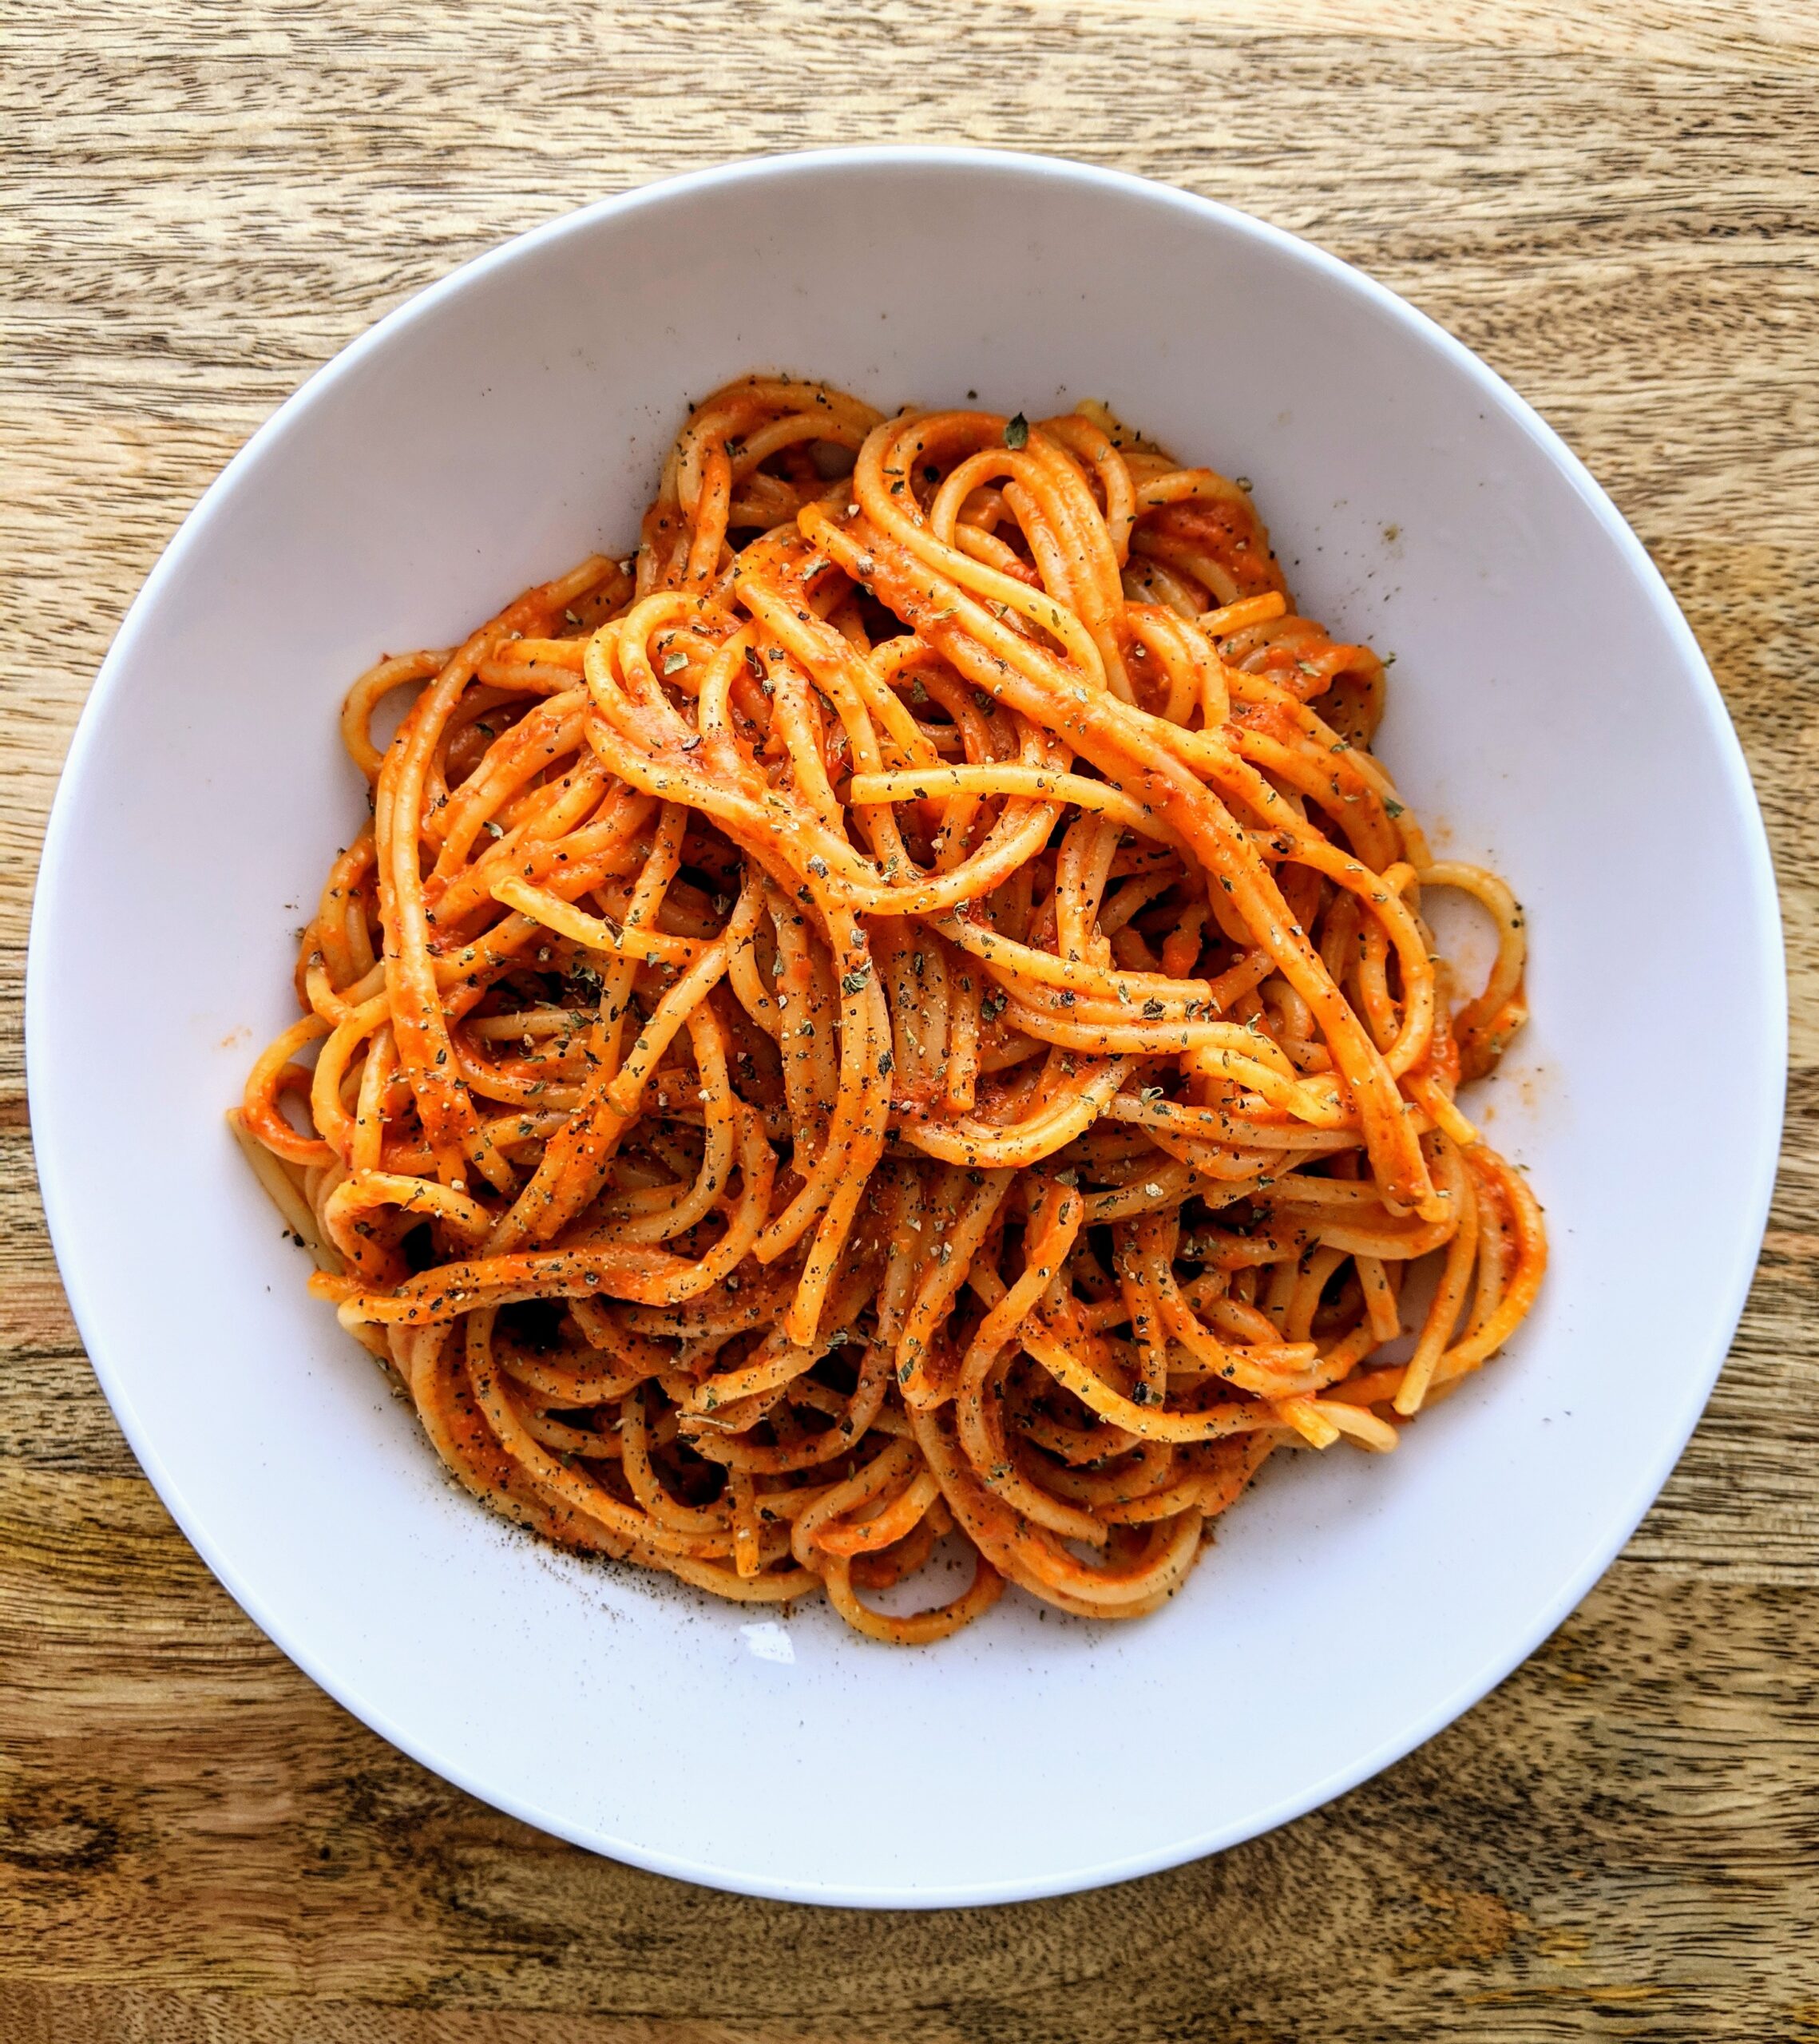 A bowl of spaghetti coated in a bright red roasted red pepper and tomato sauce. Garnished with a dusting of dried oregano.